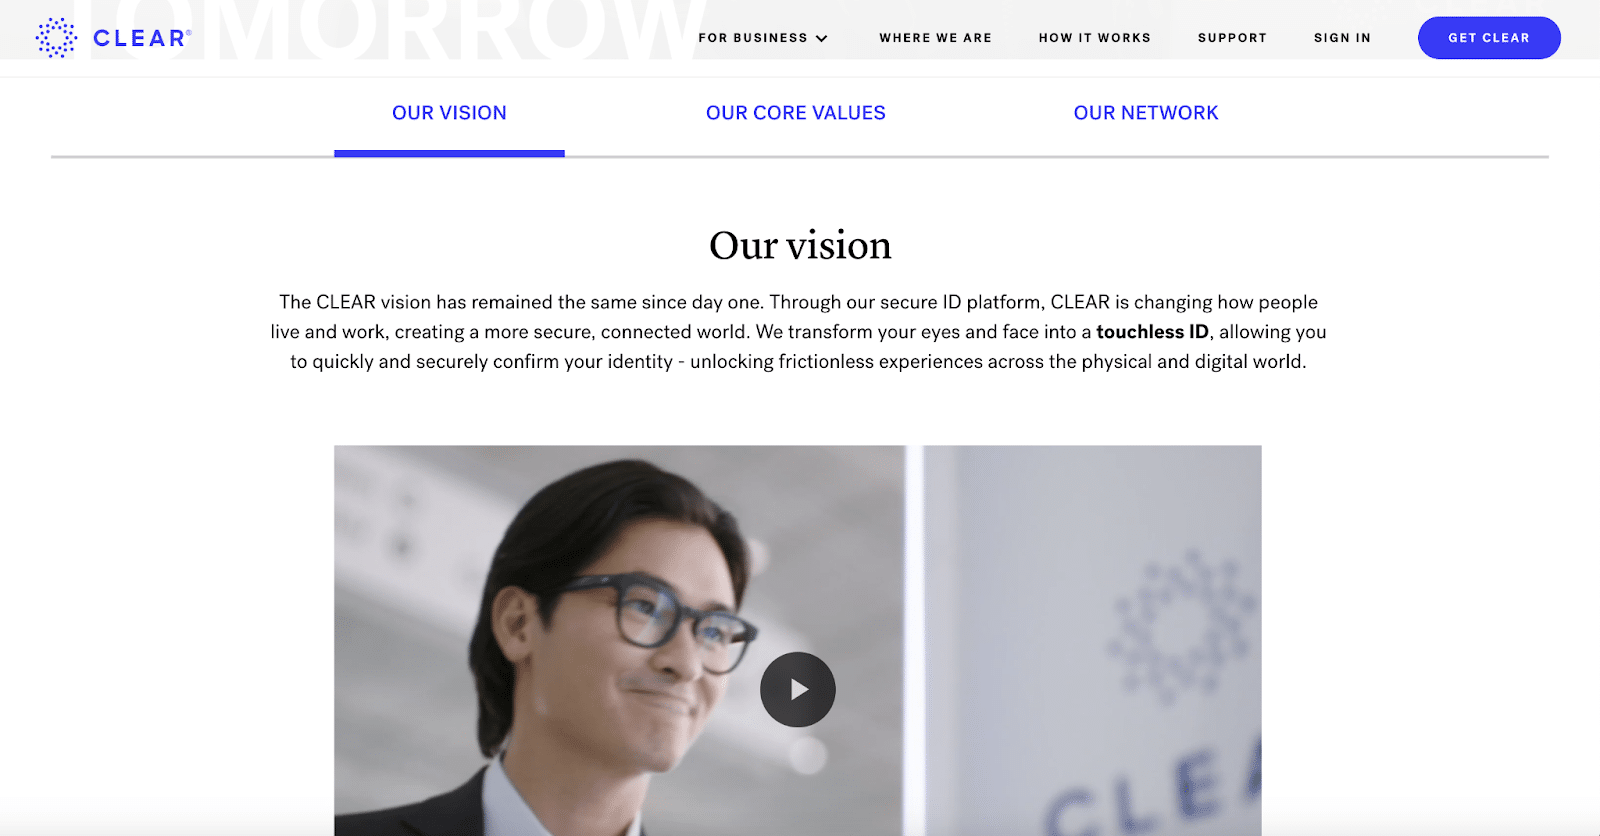 Clear focuses on its vision, rather than its current company state.